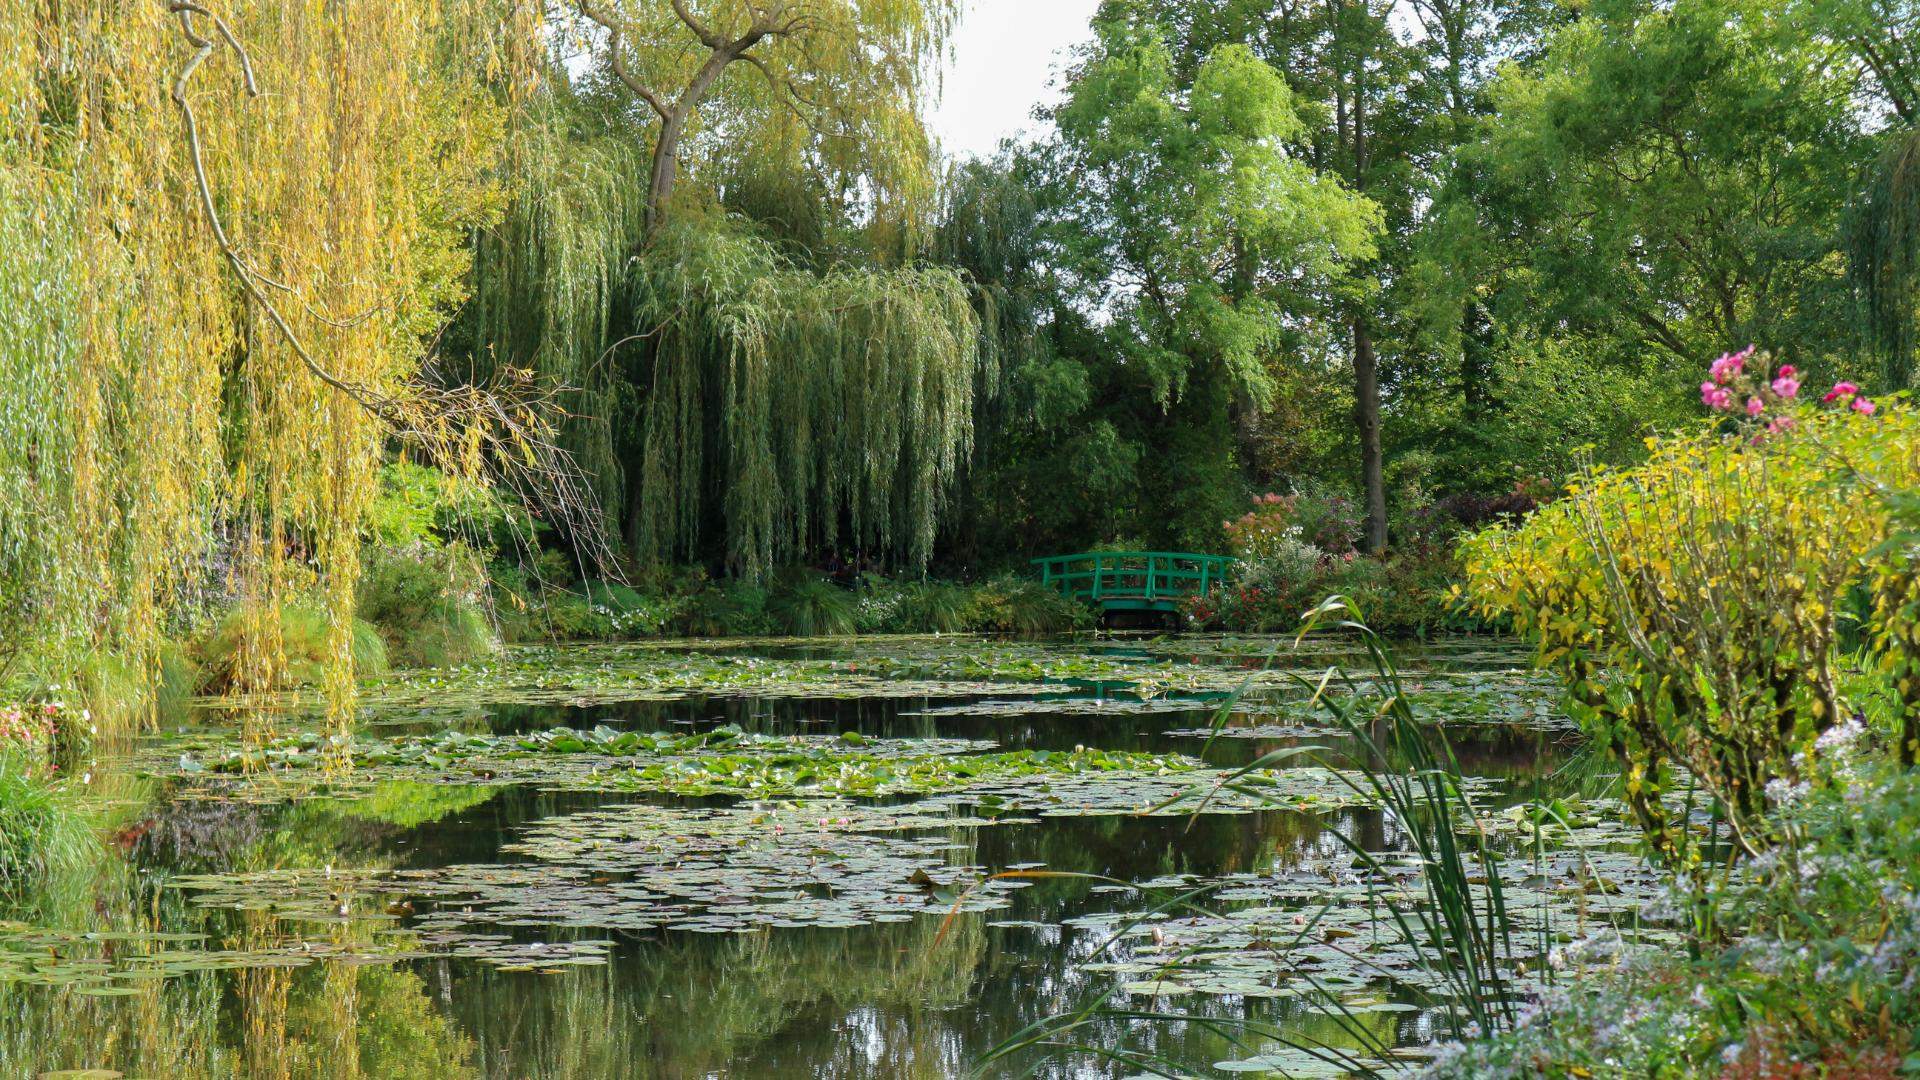 Monet's House and Gardens at Giverny